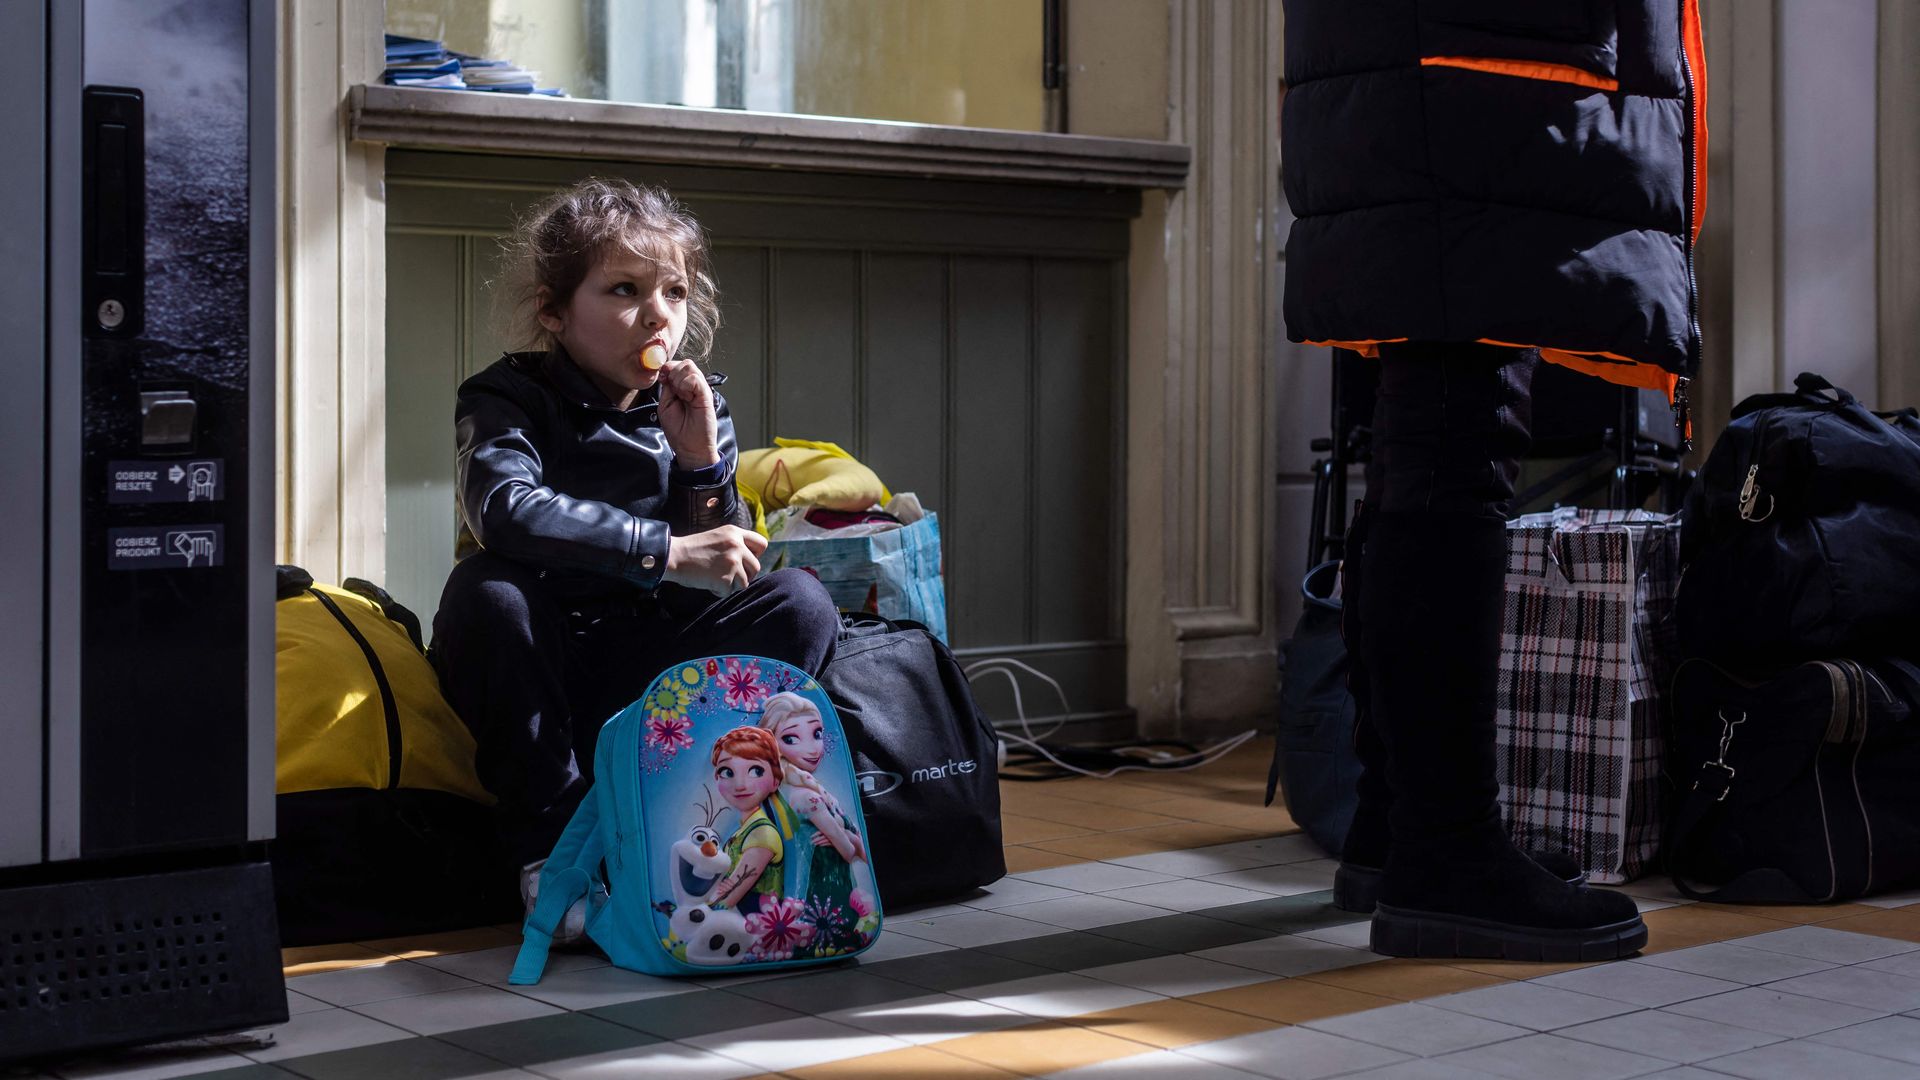  A refugee girl from Ukraine sits with her luggage in the ticket hall of the railway station in Przemysl, eastern Poland, April 7